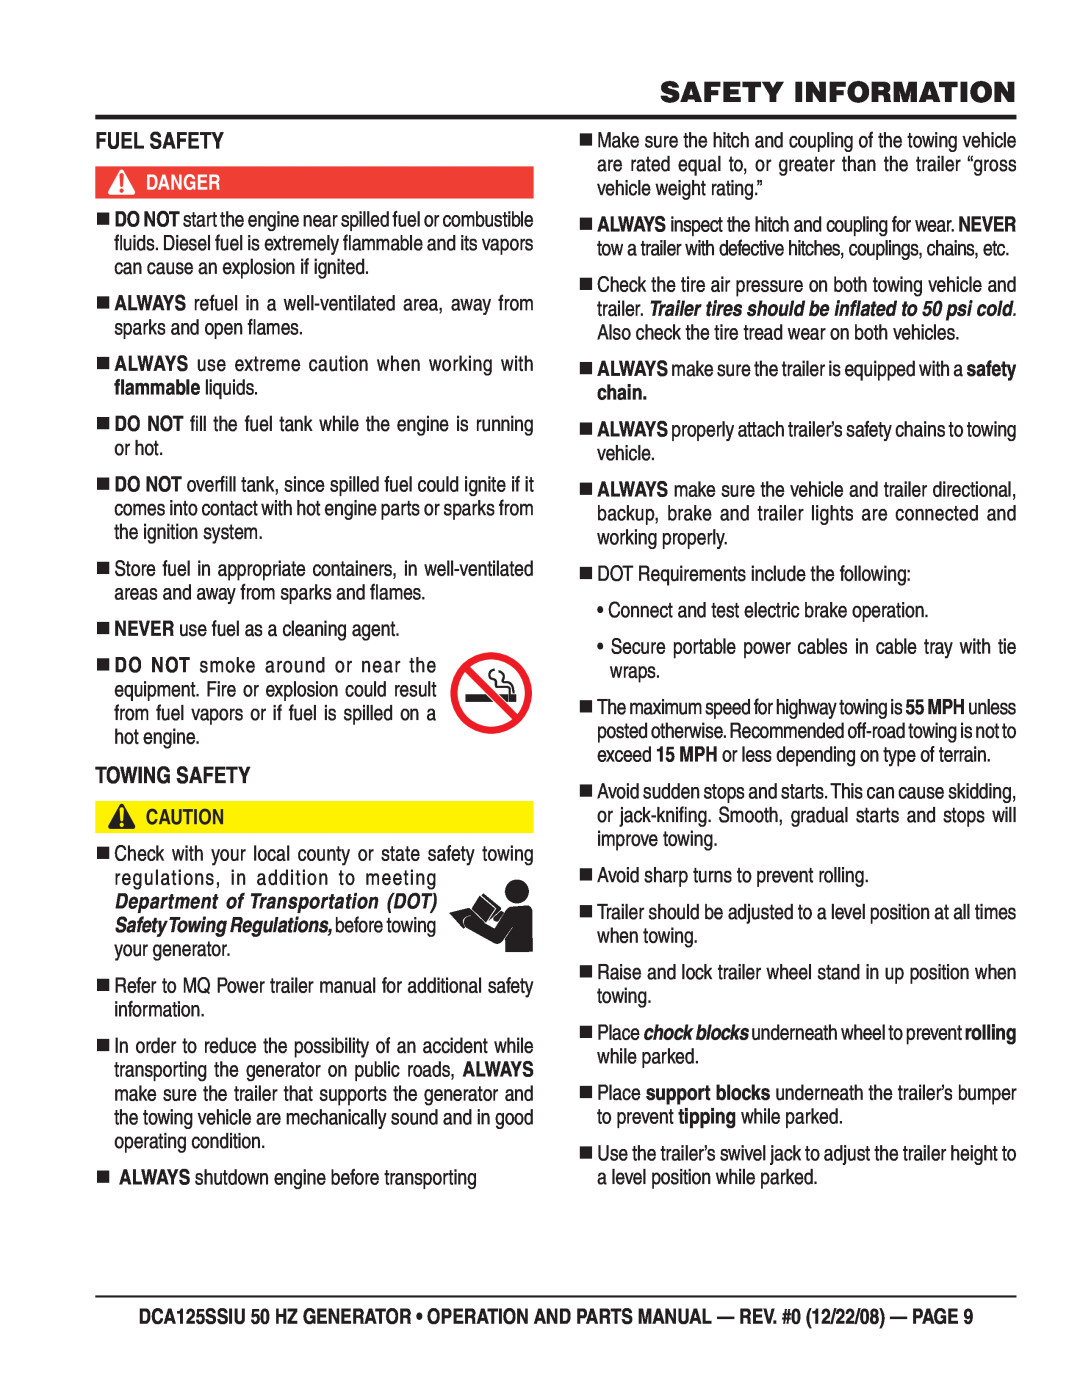 Multiquip DCA125SSIU manual Fuel Safety, Towing Safety, Safety Information, Danger 